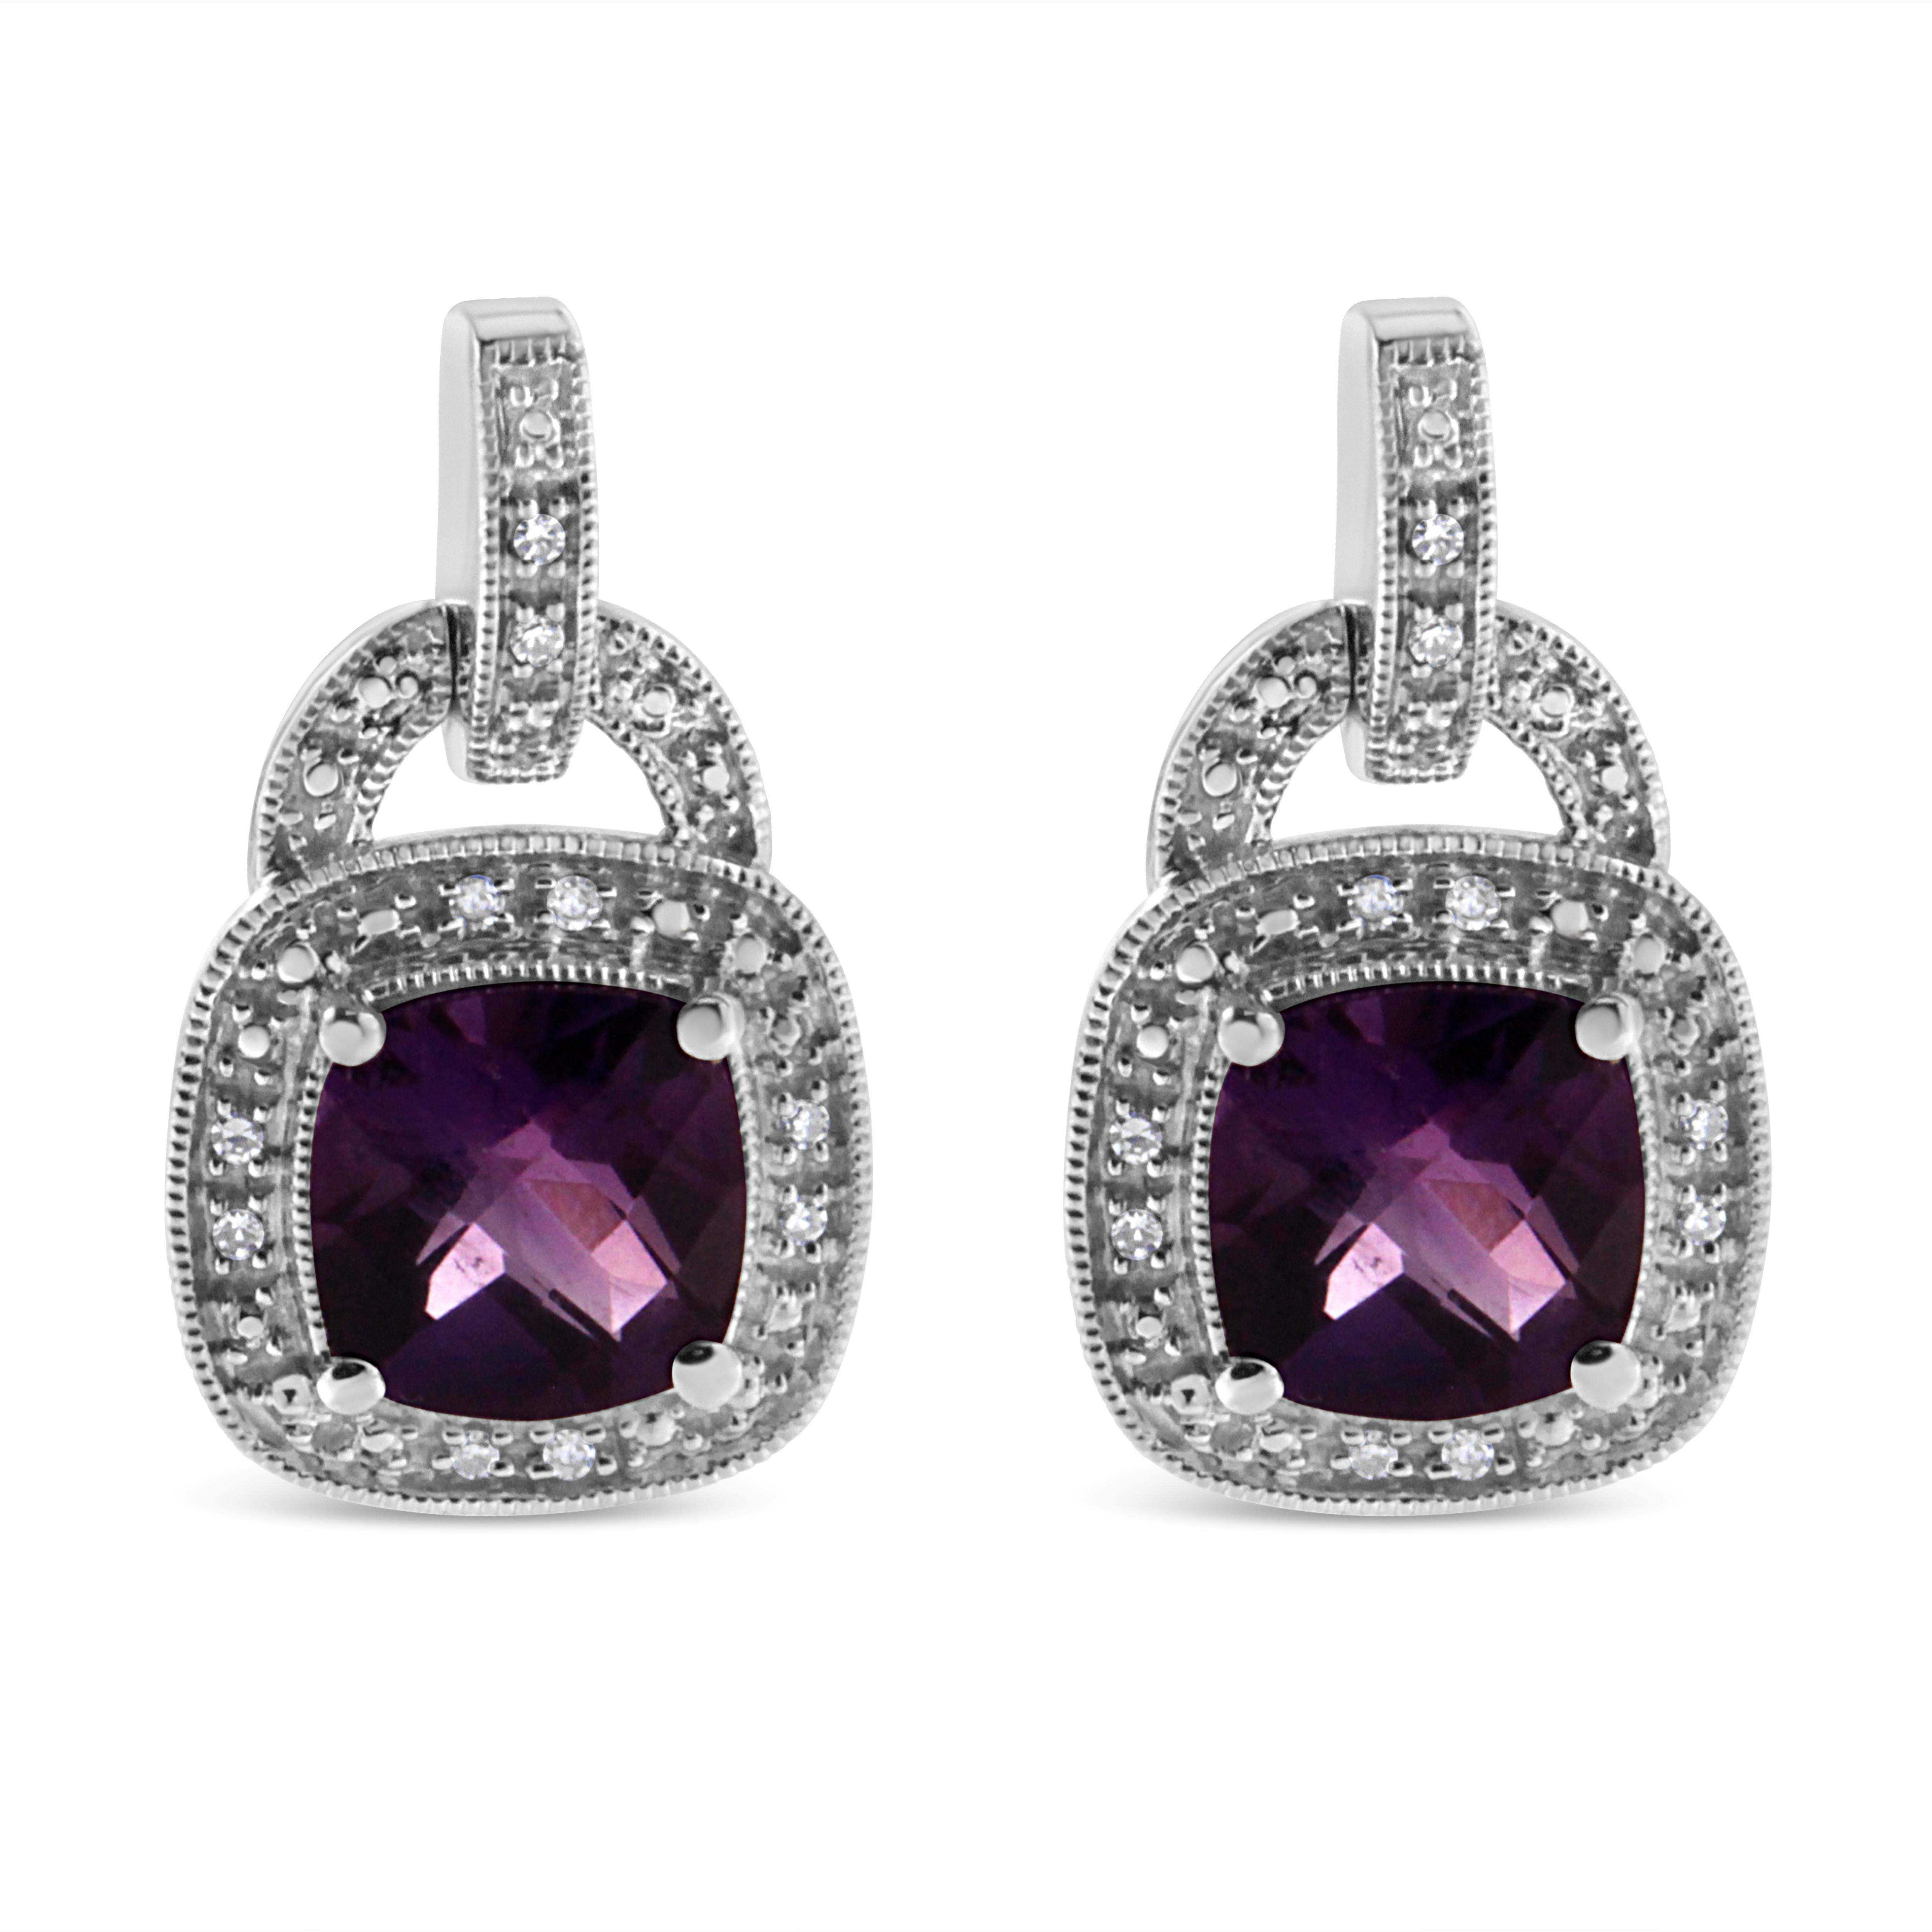 Beautifully express your love for her with these radiant amethyst and diamond earrings. Crafted in luminous sterling silver these earrings features 2 centrally staged 8MM cushion cut amethyst that are gracefully complemented by 20 sparkling single